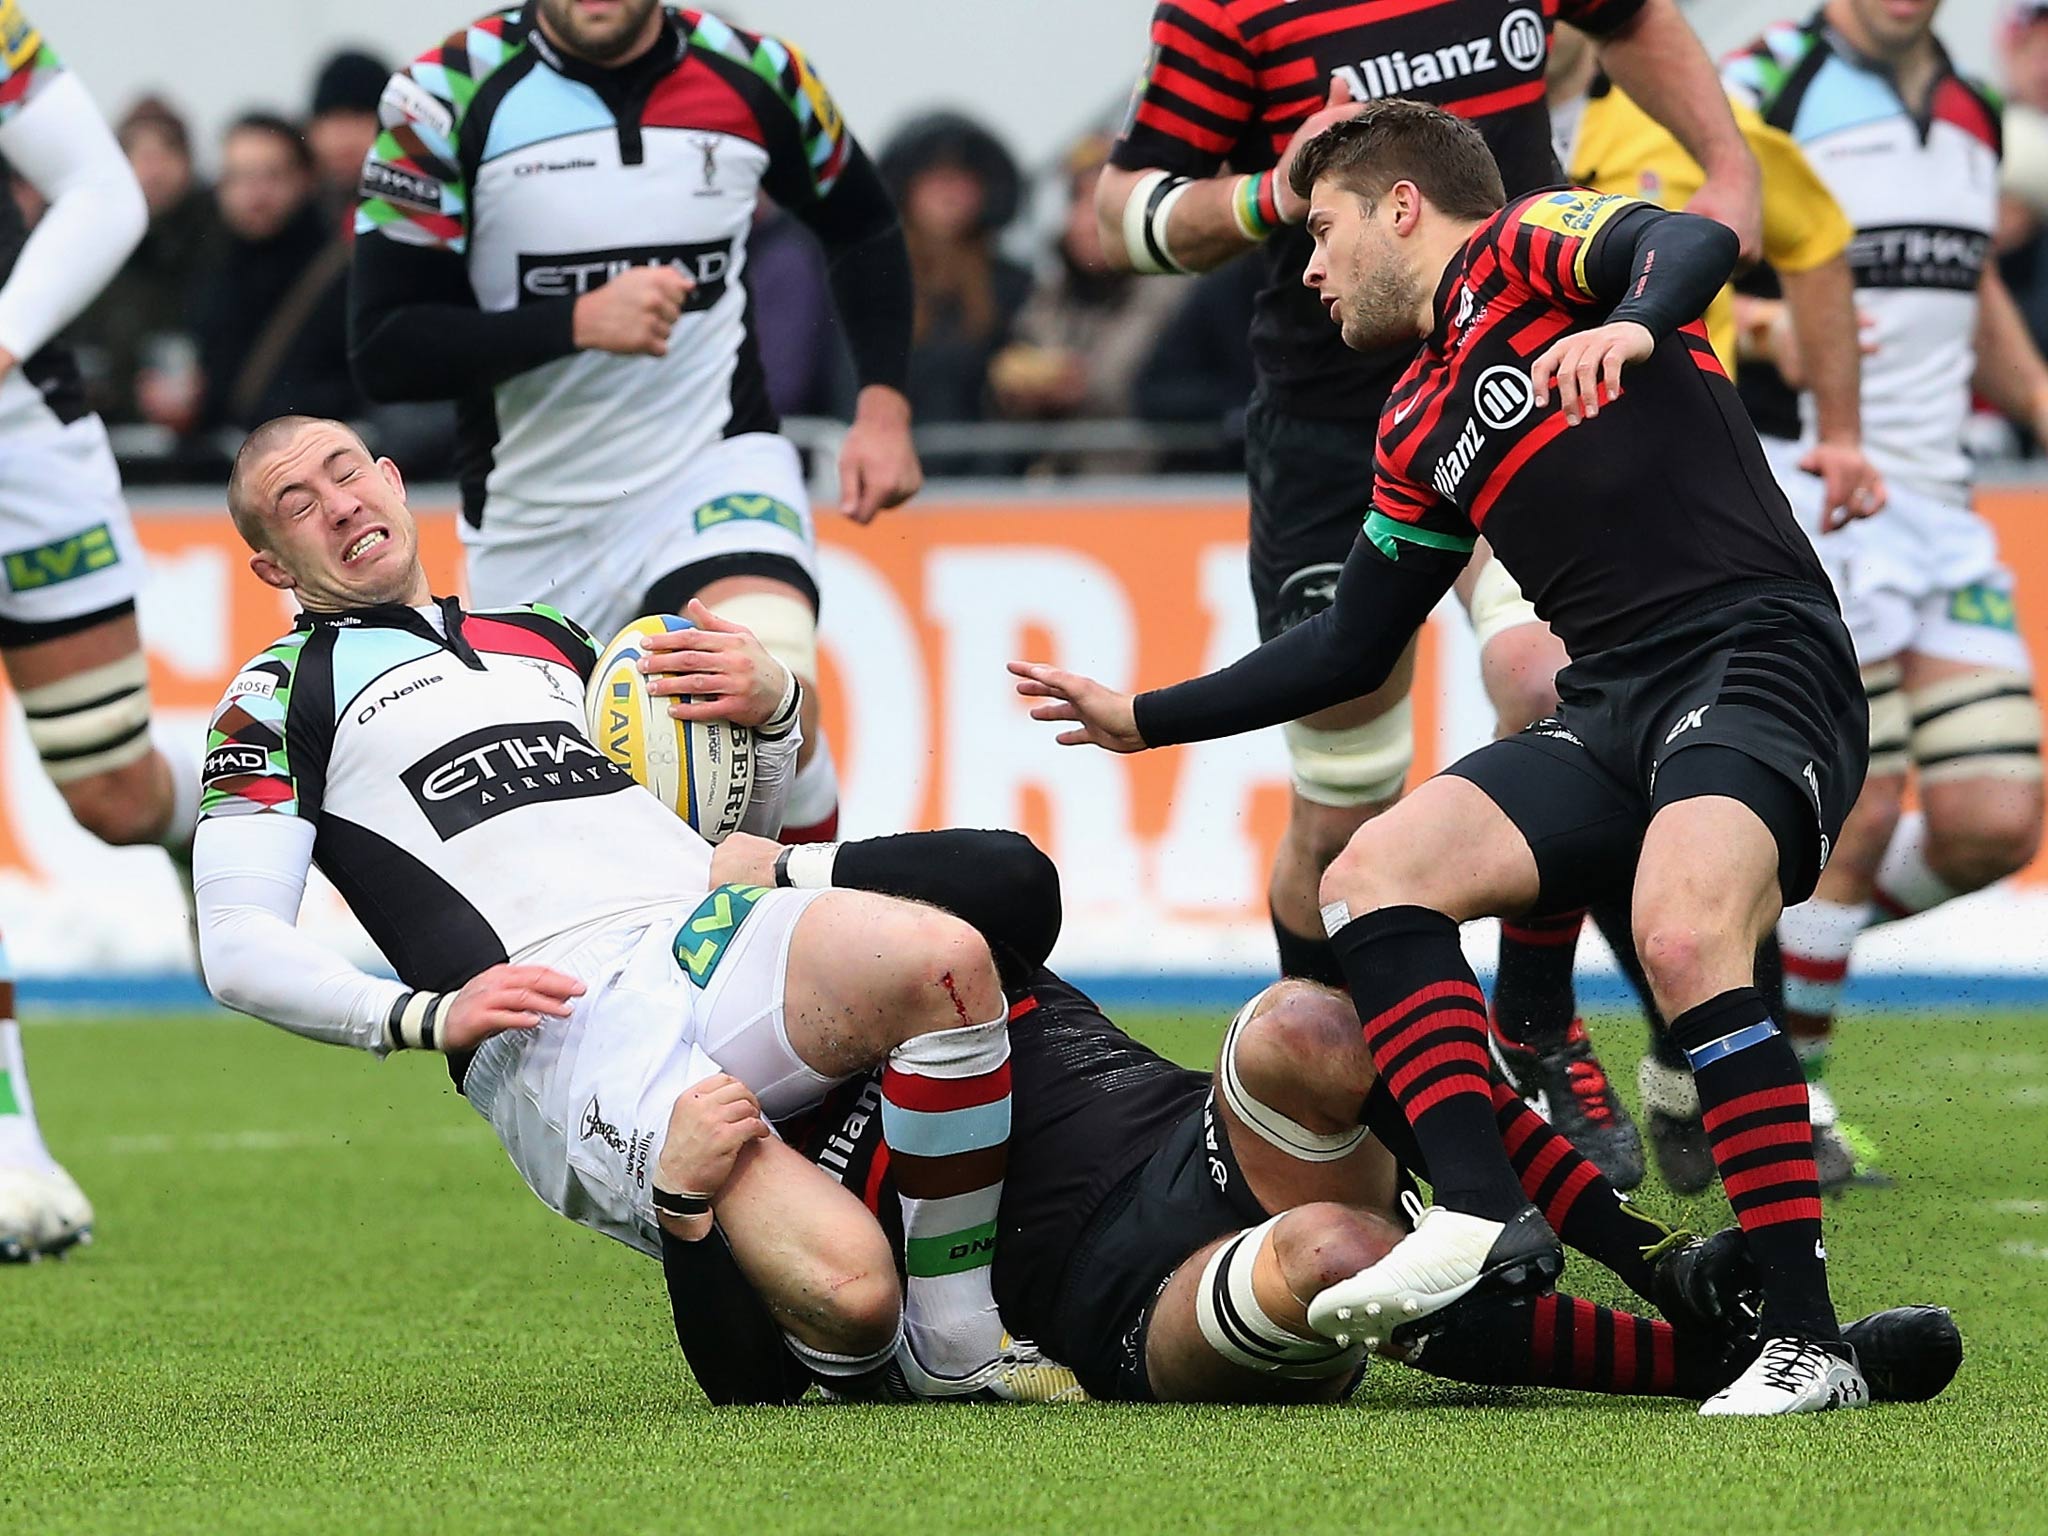 Mike Brown of Harlequins in action against Saracens